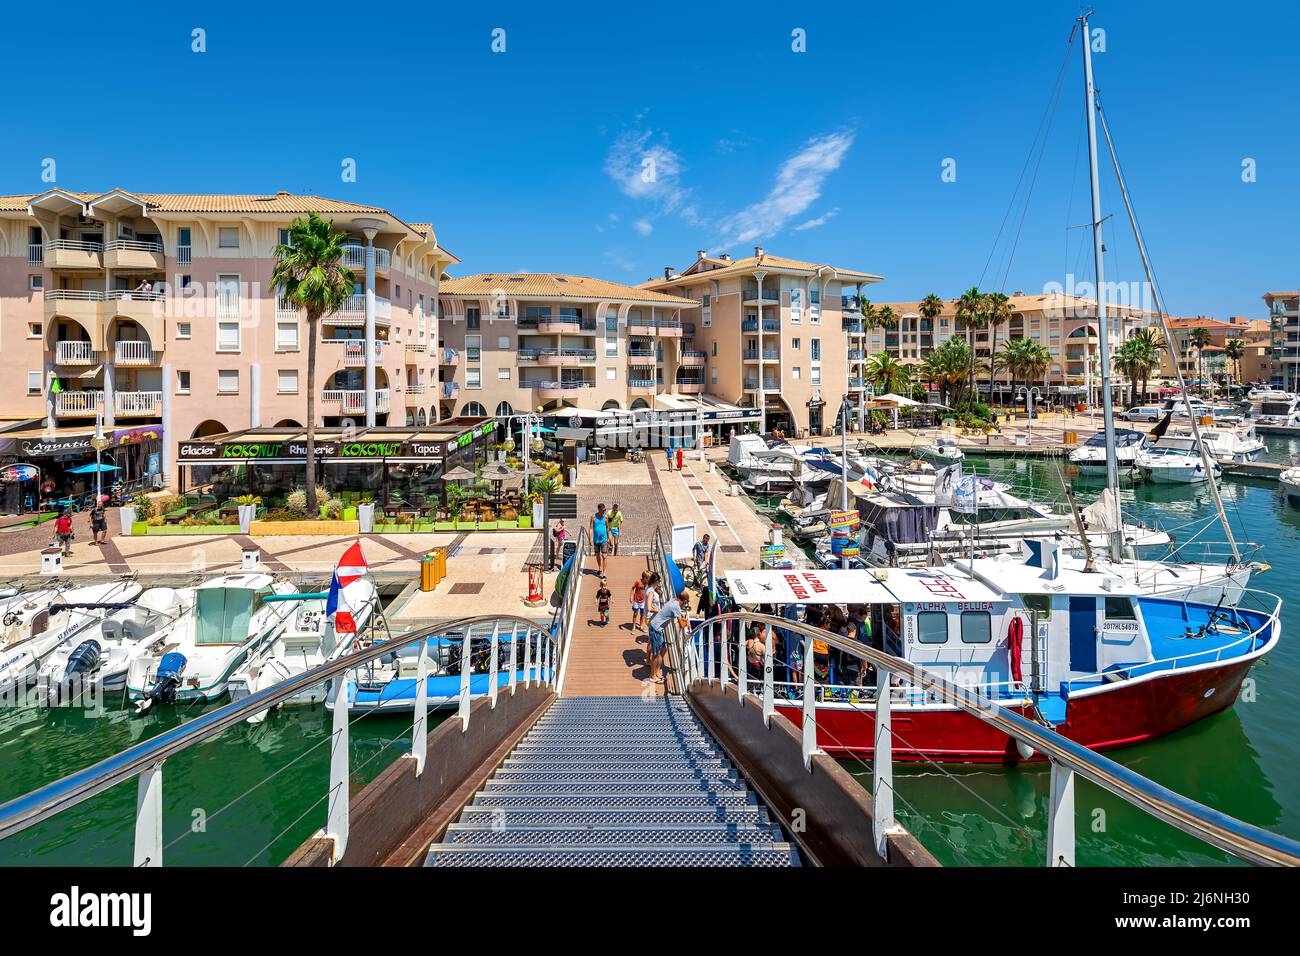 View of boats and yachts as houses and promenade with restaurants on background in Frejus - city on French Riviera. Stock Photo